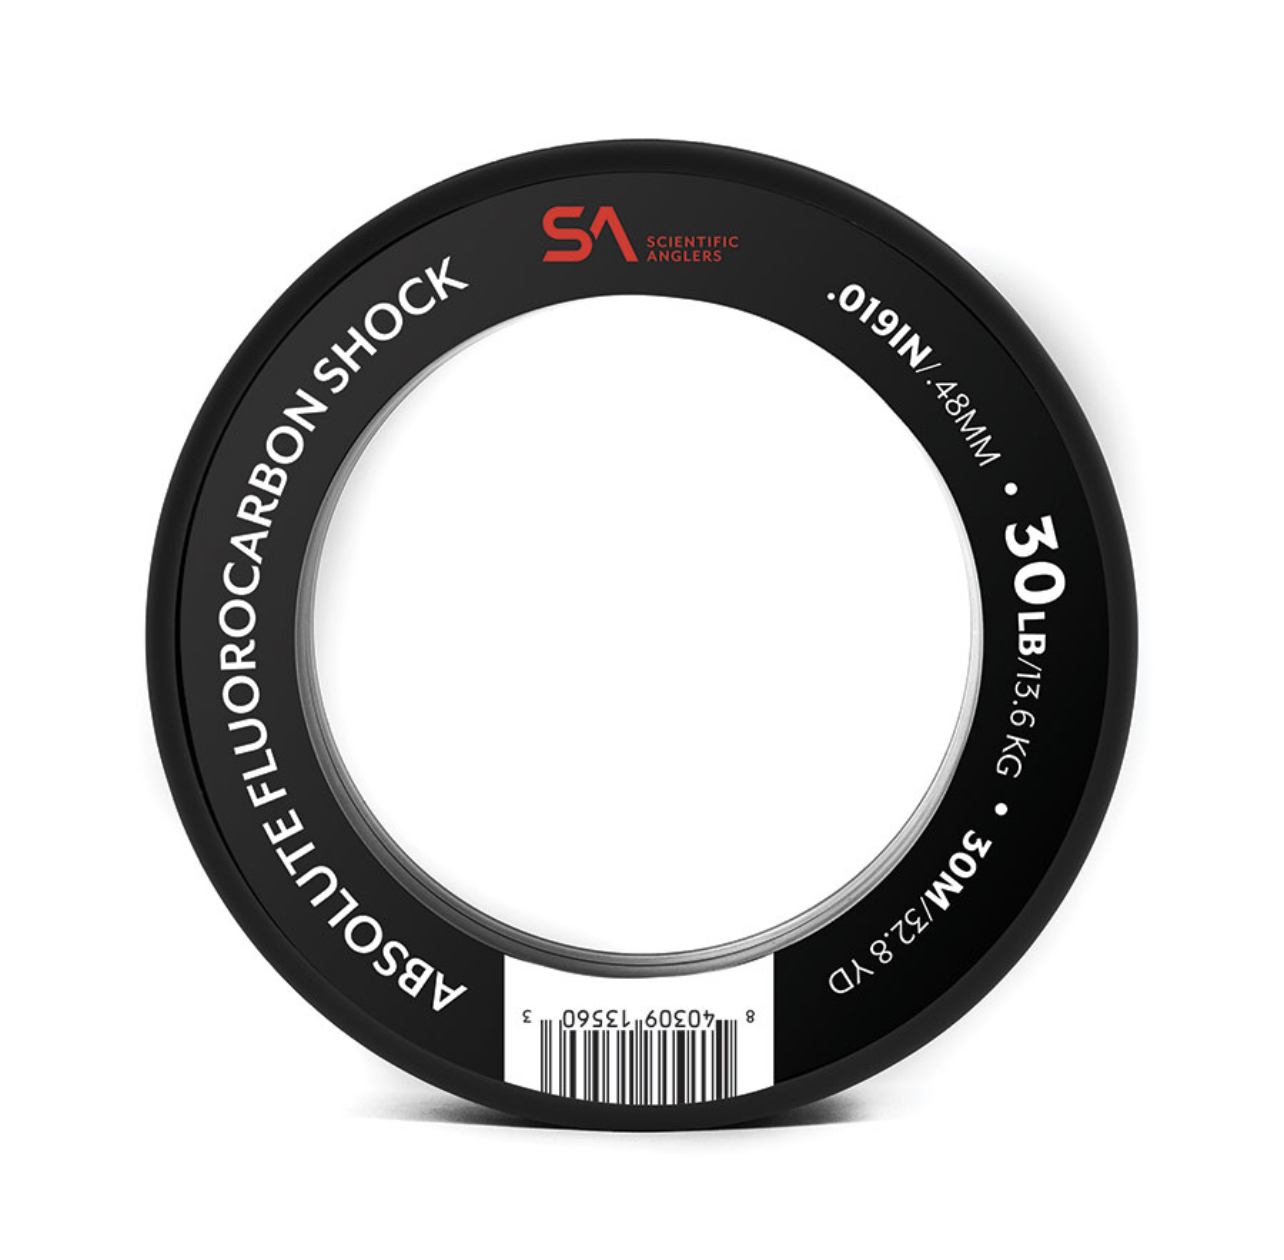 Scientific Anglers Absolute Fluorocarbon Shock - 30m - 60lb